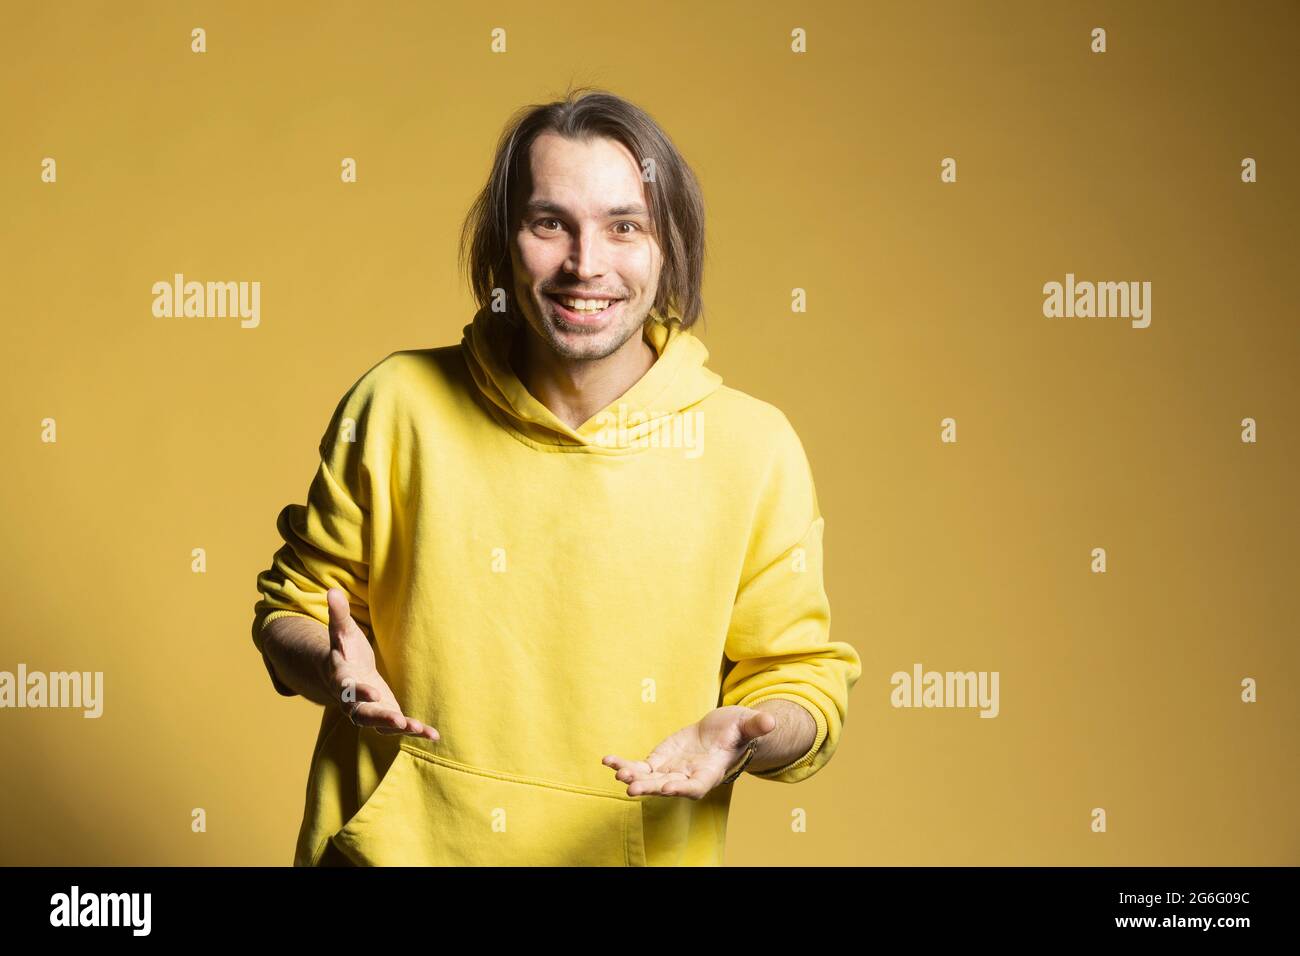 Portrait happy, excited young man on yellow background Stock Photo